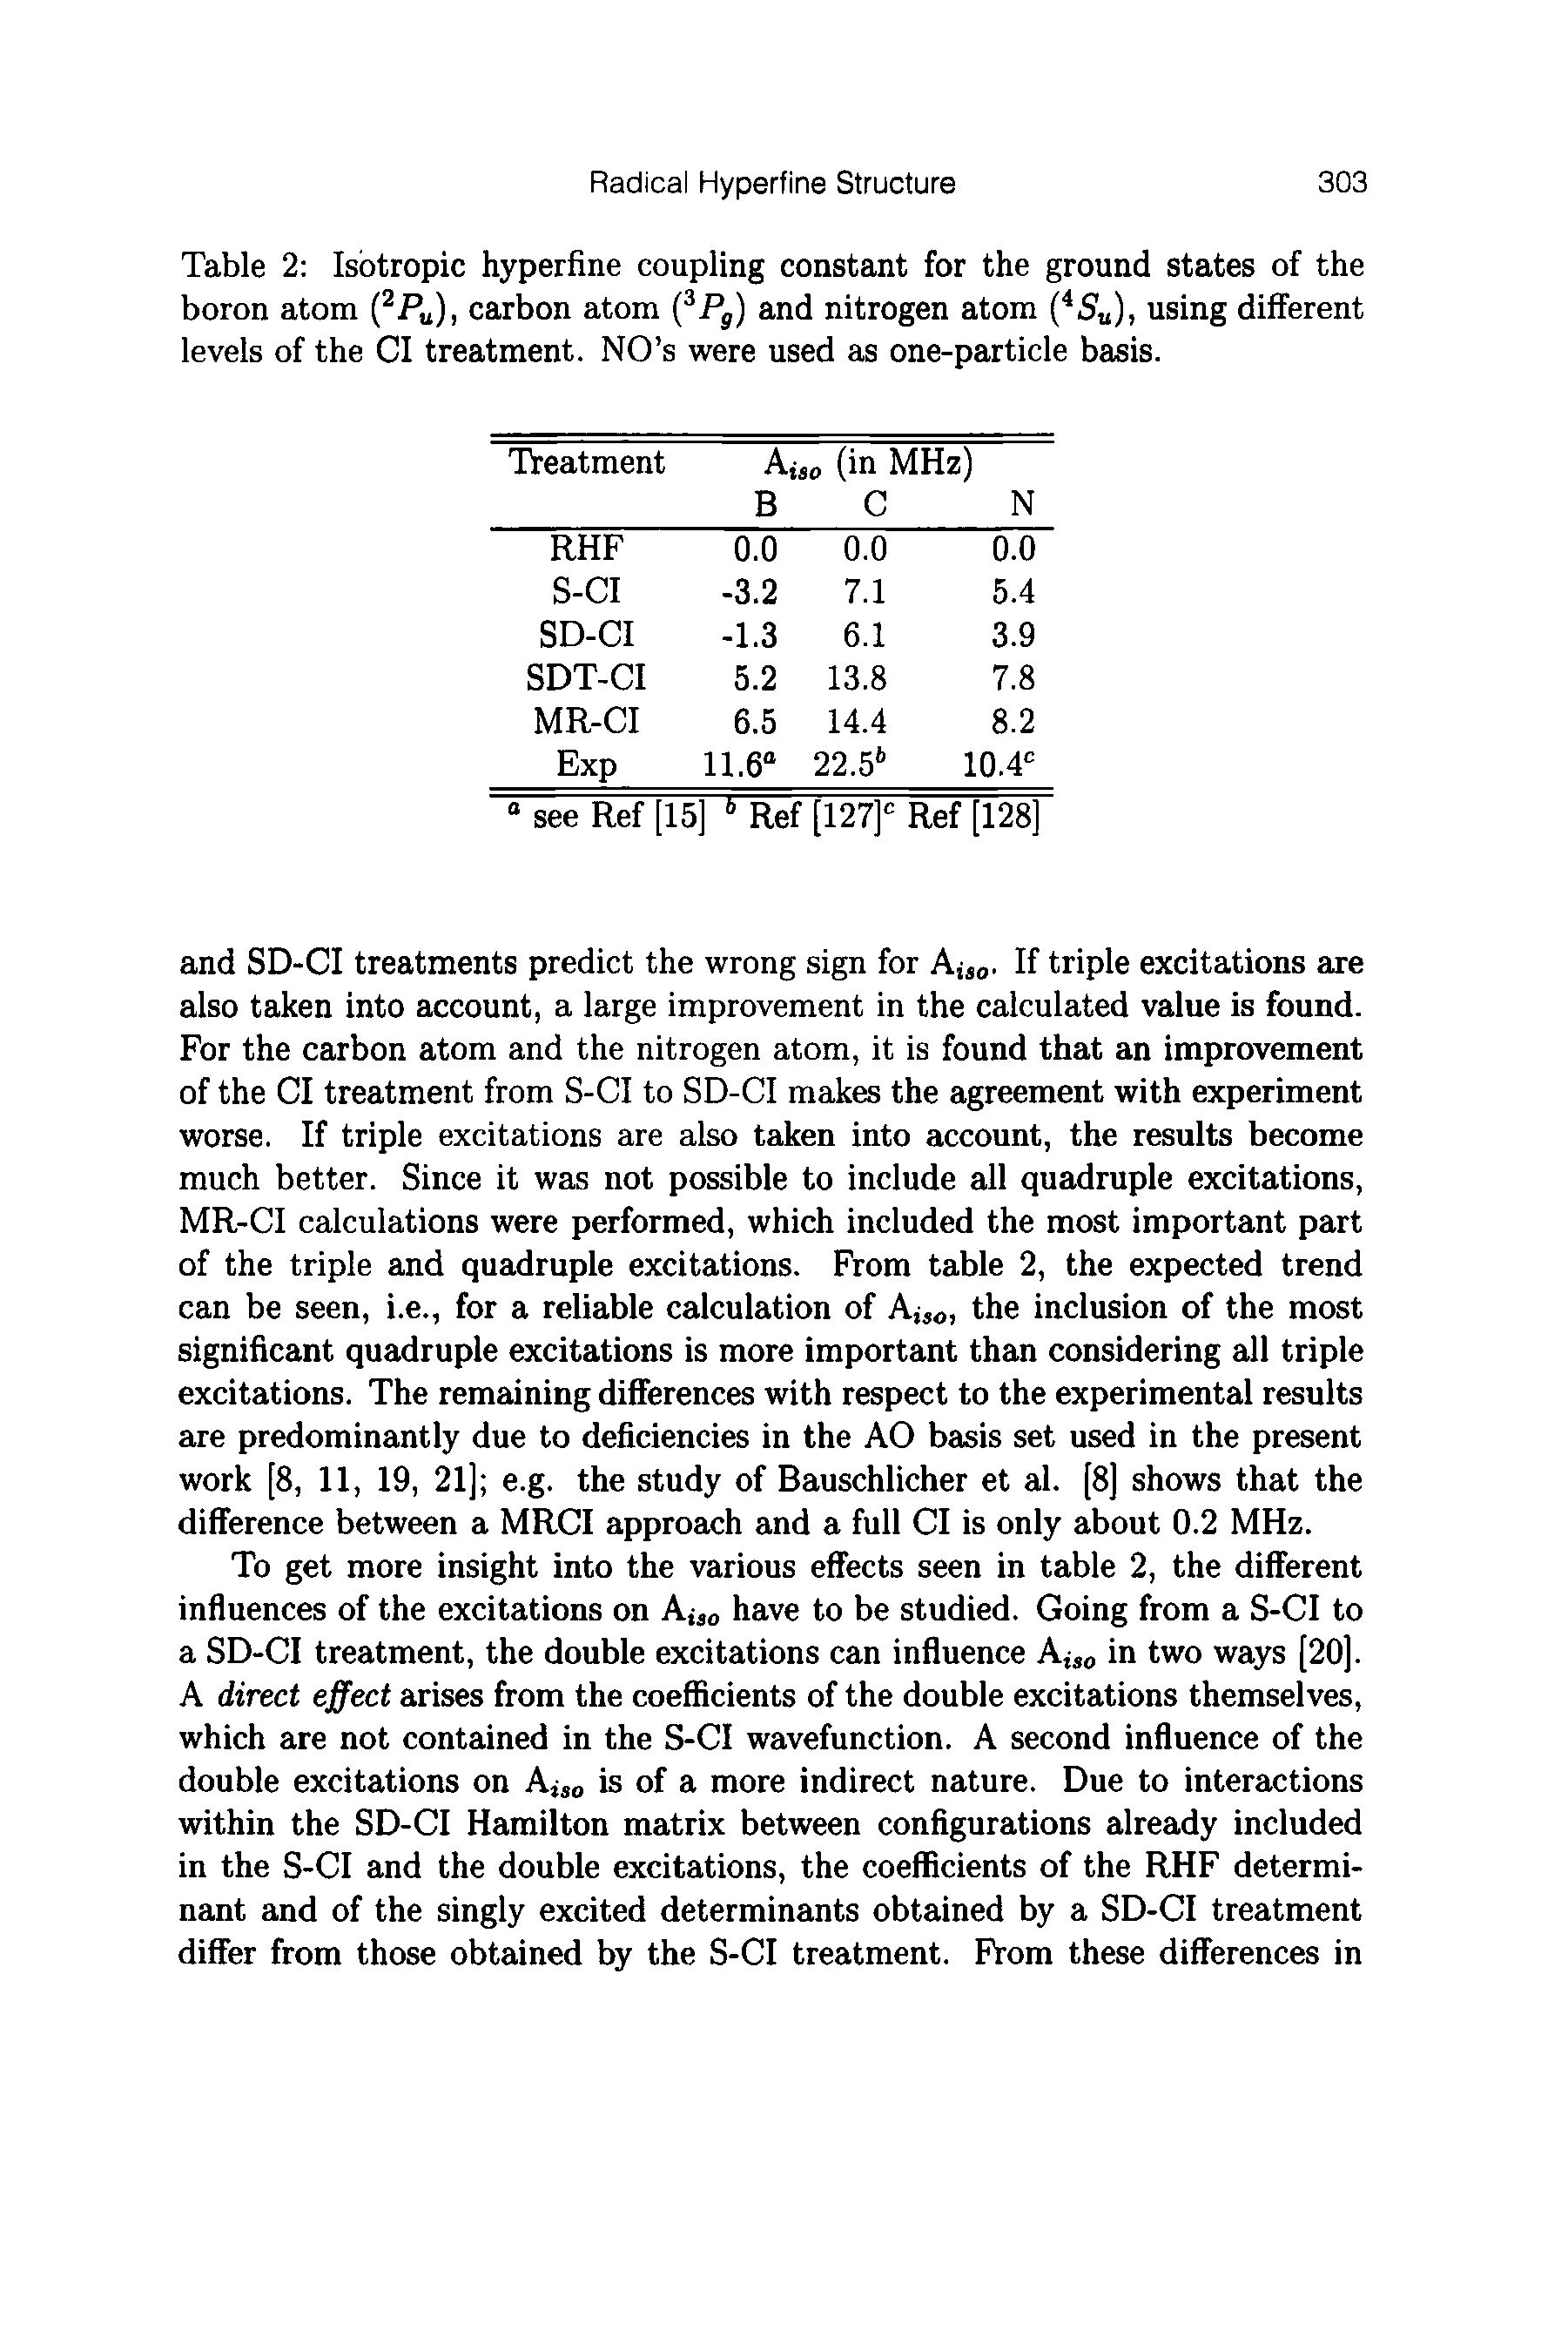 Table 2 Isotropic hyperfine coupling constant for the ground states of the boron atom (2PU), carbon atom (3Pg) and nitrogen atom (4S U), using different levels of the Cl treatment. NO s were used as one-particle basis.